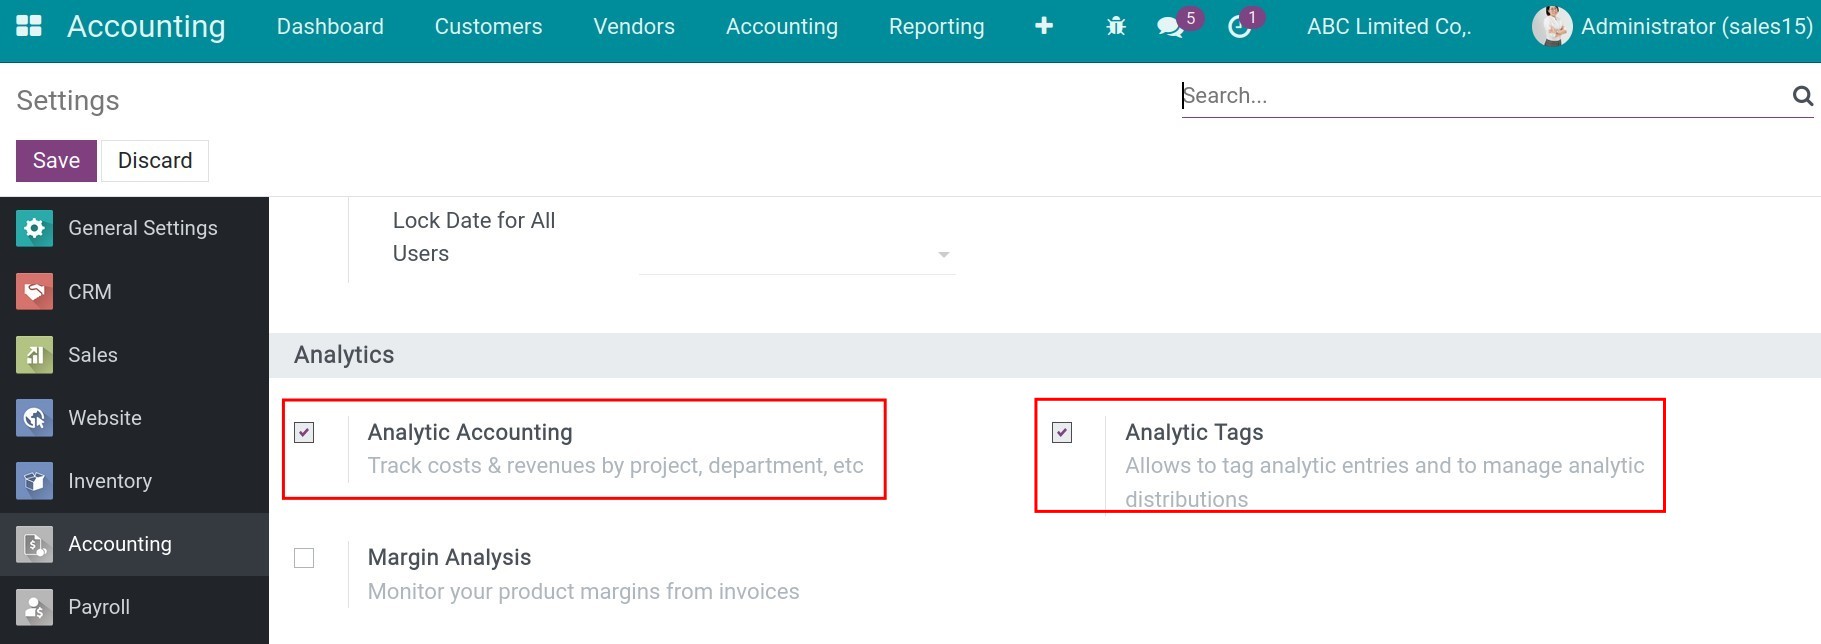 Enable analytic accounting feature Viindoo